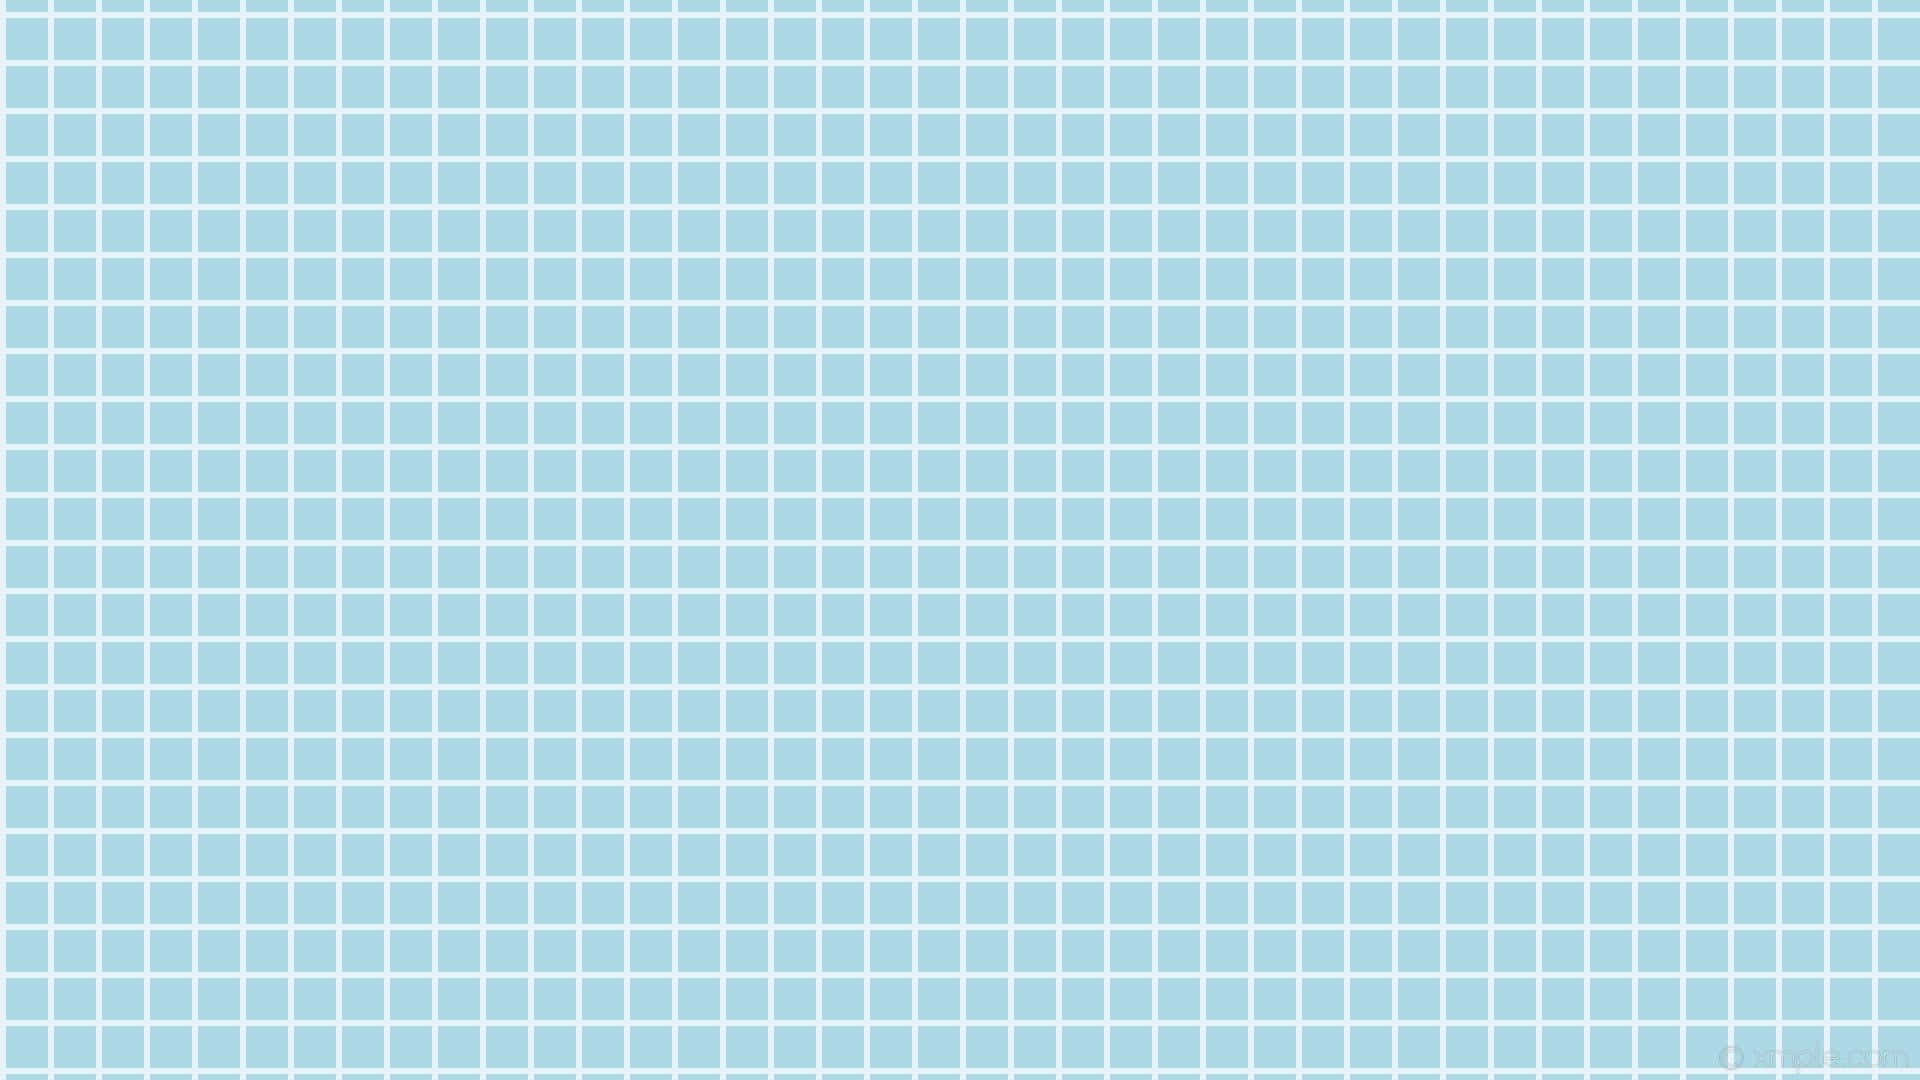 [200+] Grid Backgrounds | Wallpapers.com